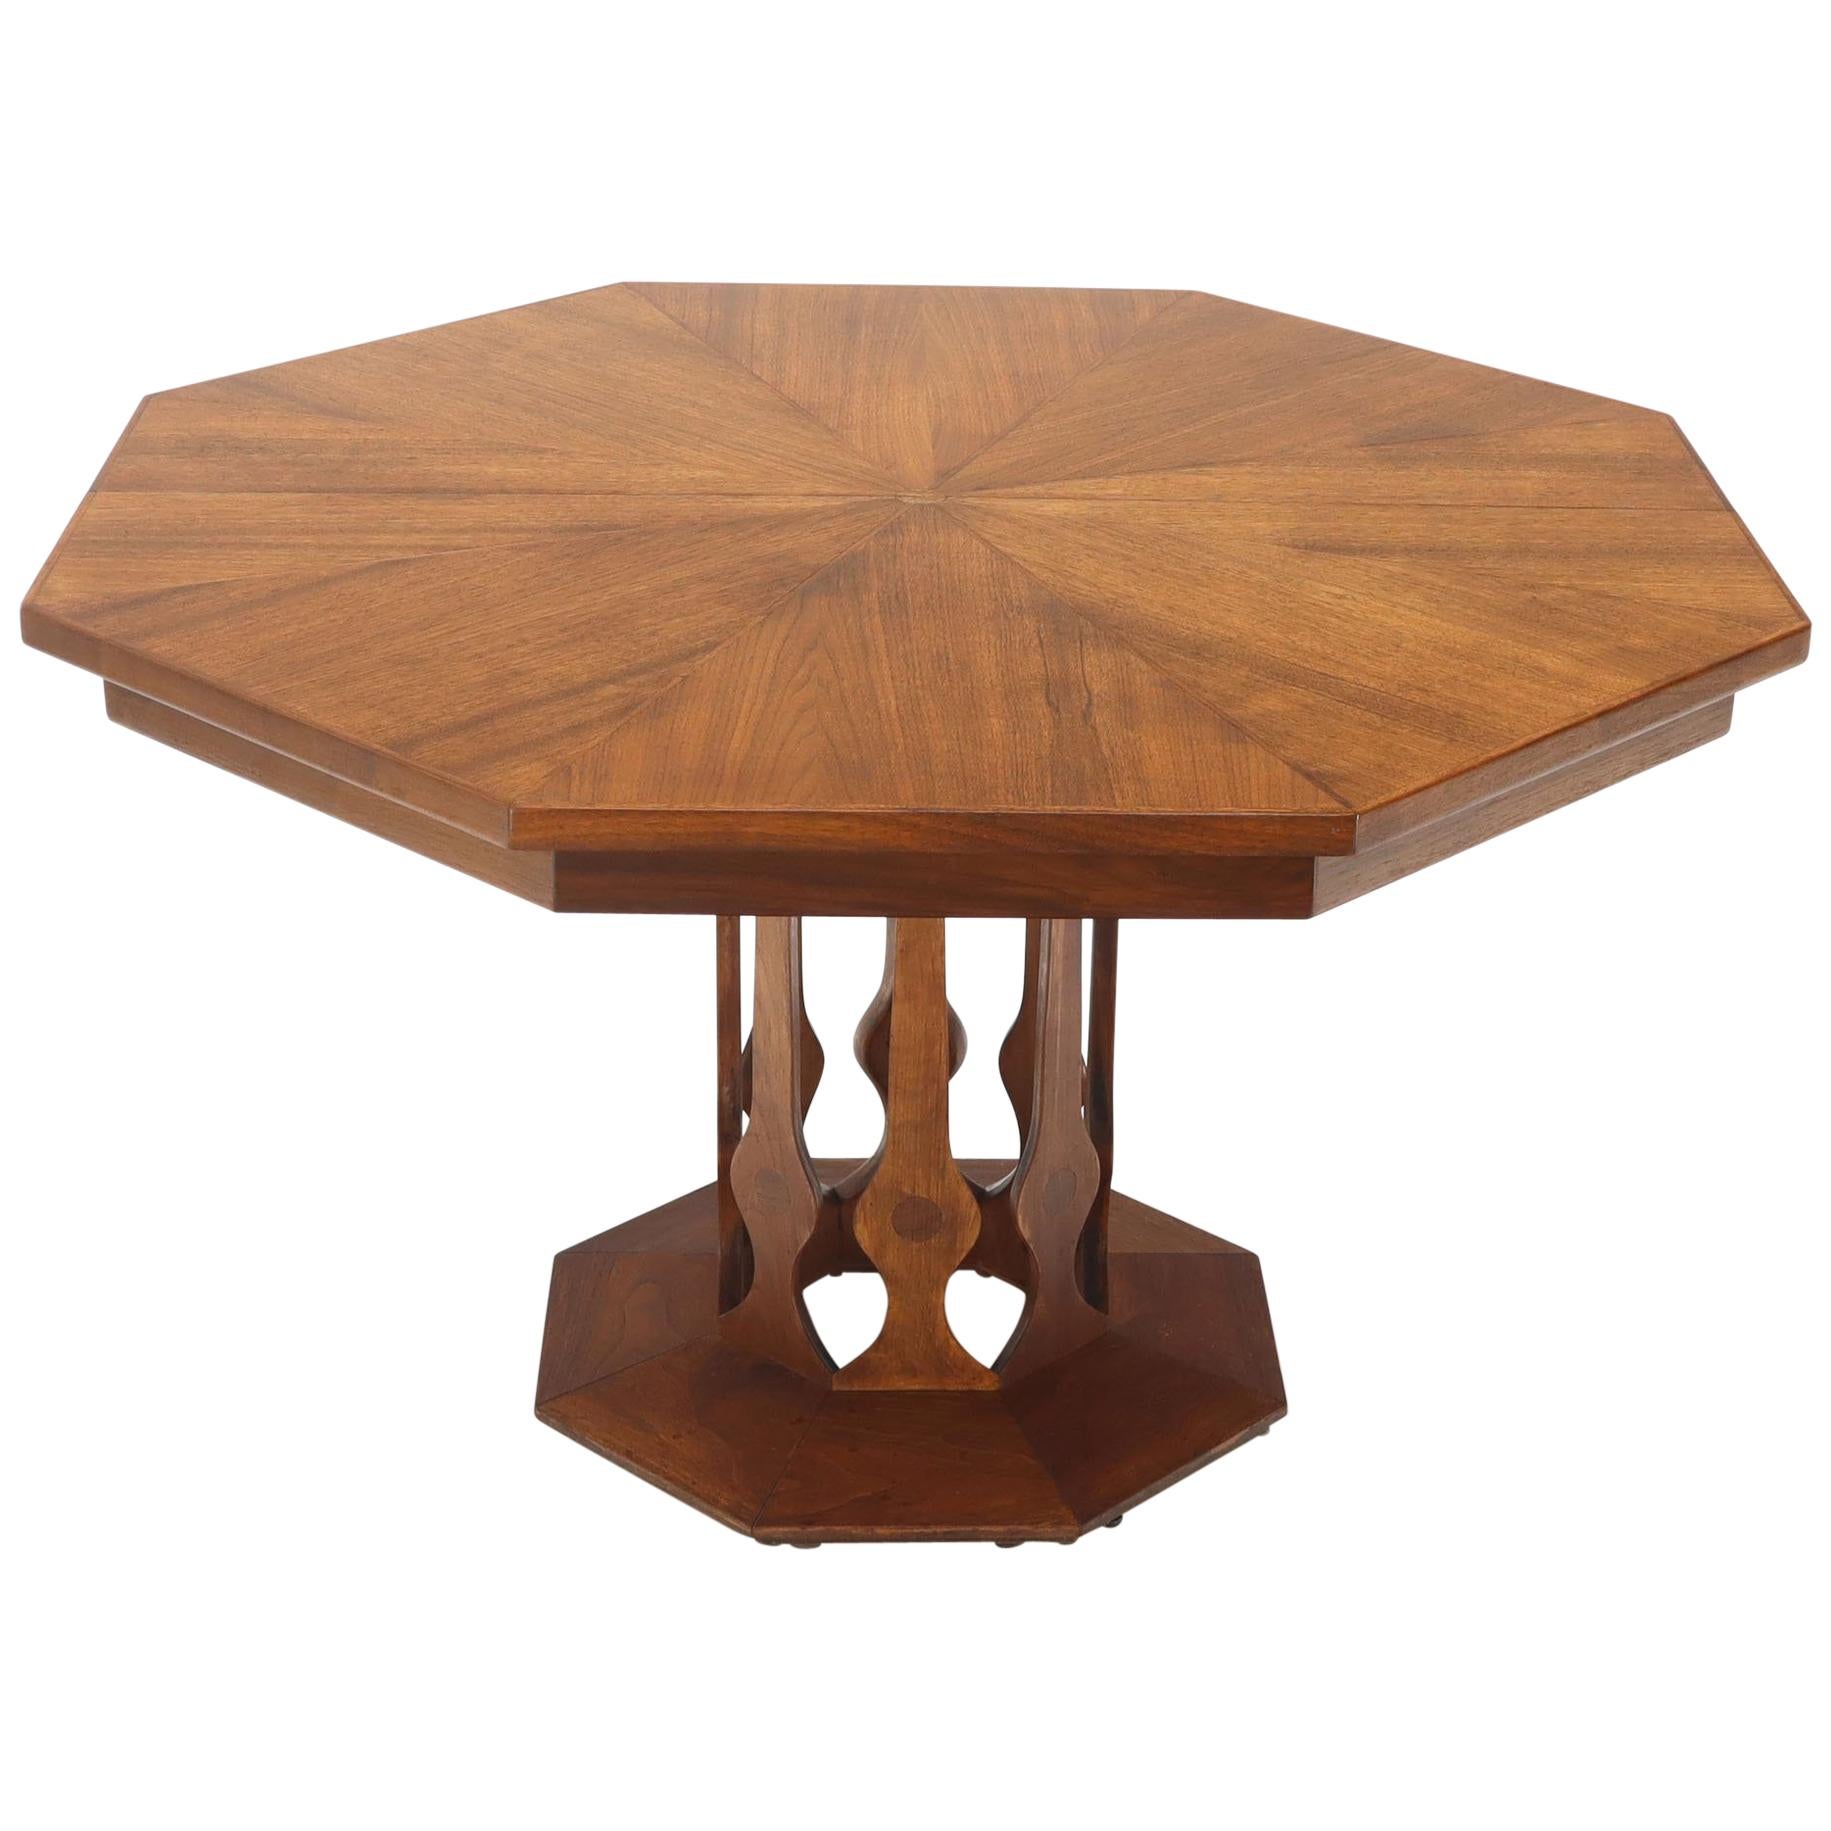 Oiled Walnut Octagonal Round Dining Table with Two Extension Leafs Probber Style